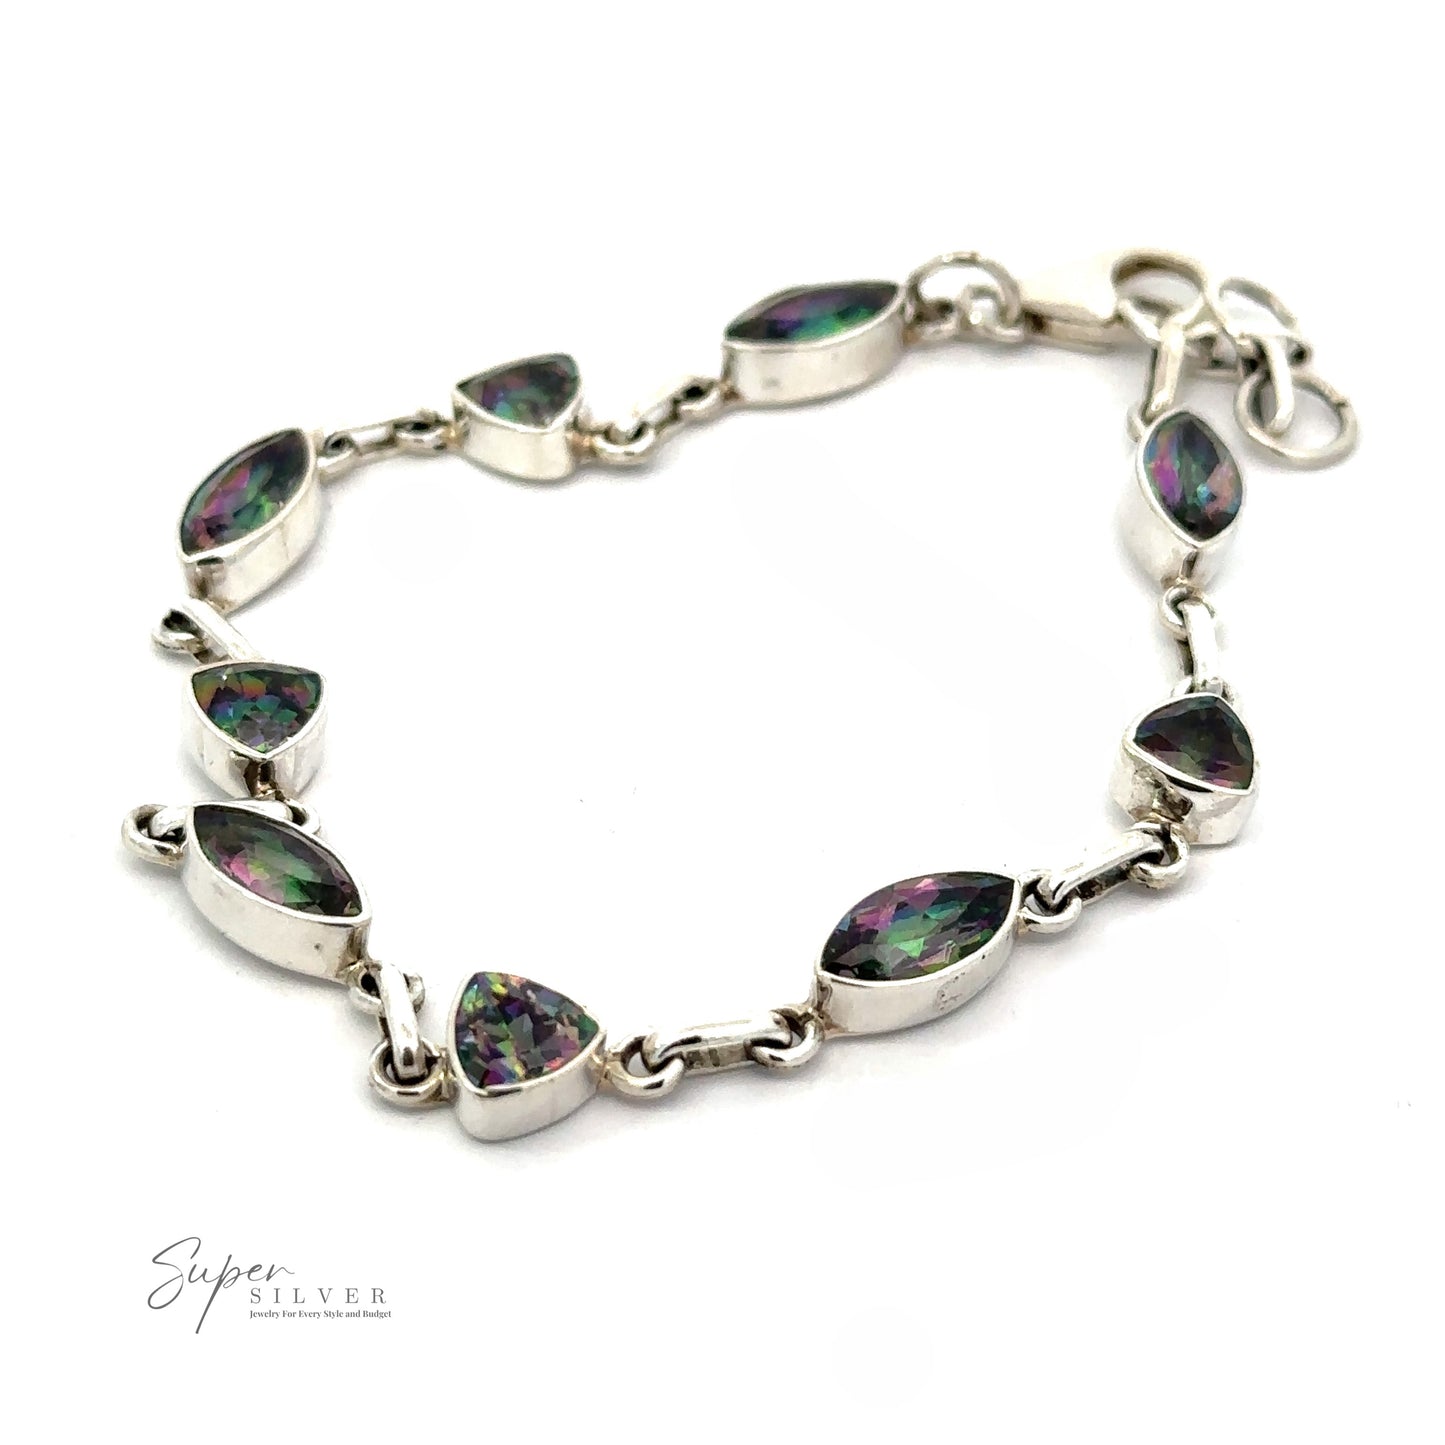 
                  
                    A sterling silver bracelet with linked oval and teardrop-shaped iridescent gemstones, displayed on a white background. The Super Silver brand logo is visible in the corner, highlighting the exquisite craftsmanship of this Rainbow Mystic Topaz Marquise and Triangle Shape Link Bracelet.
                  
                